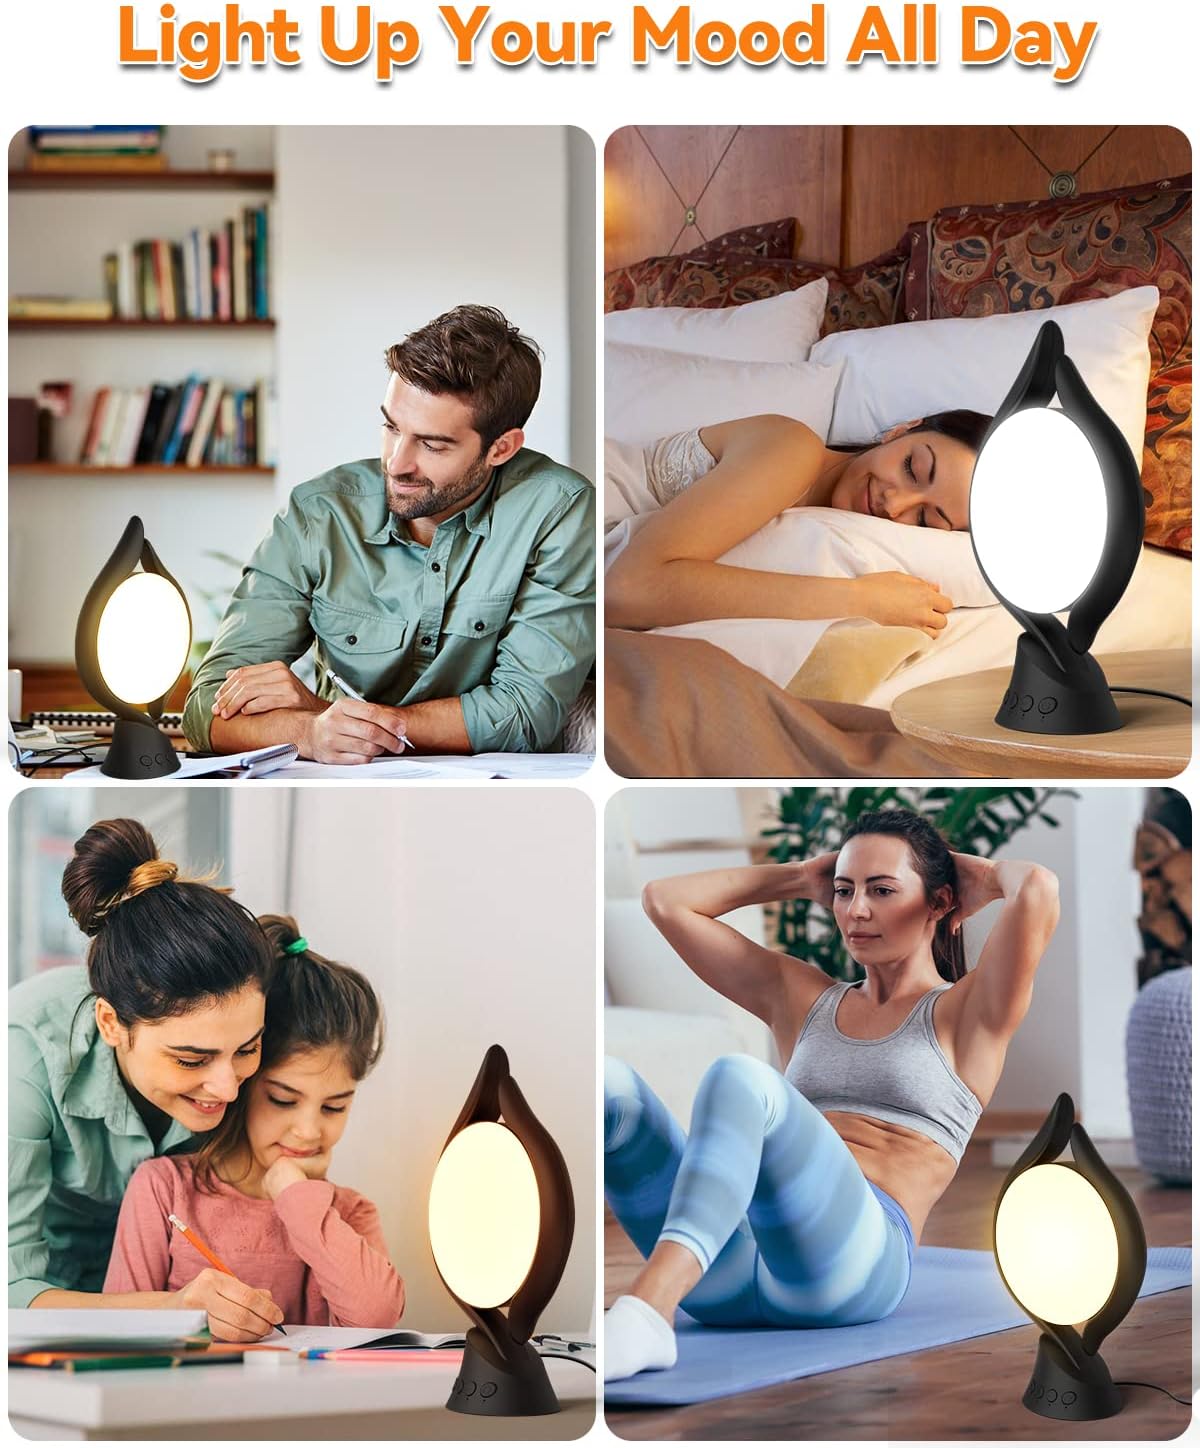 Light Therapy Lamp, UV-Free 10000 Lux Therapy Light, LED Happy Mood Lamps with 5 Adjustable Brightness Levels and Timer  Memory Function, 3 Color Temperature, Unique Art Design for a Happy Life